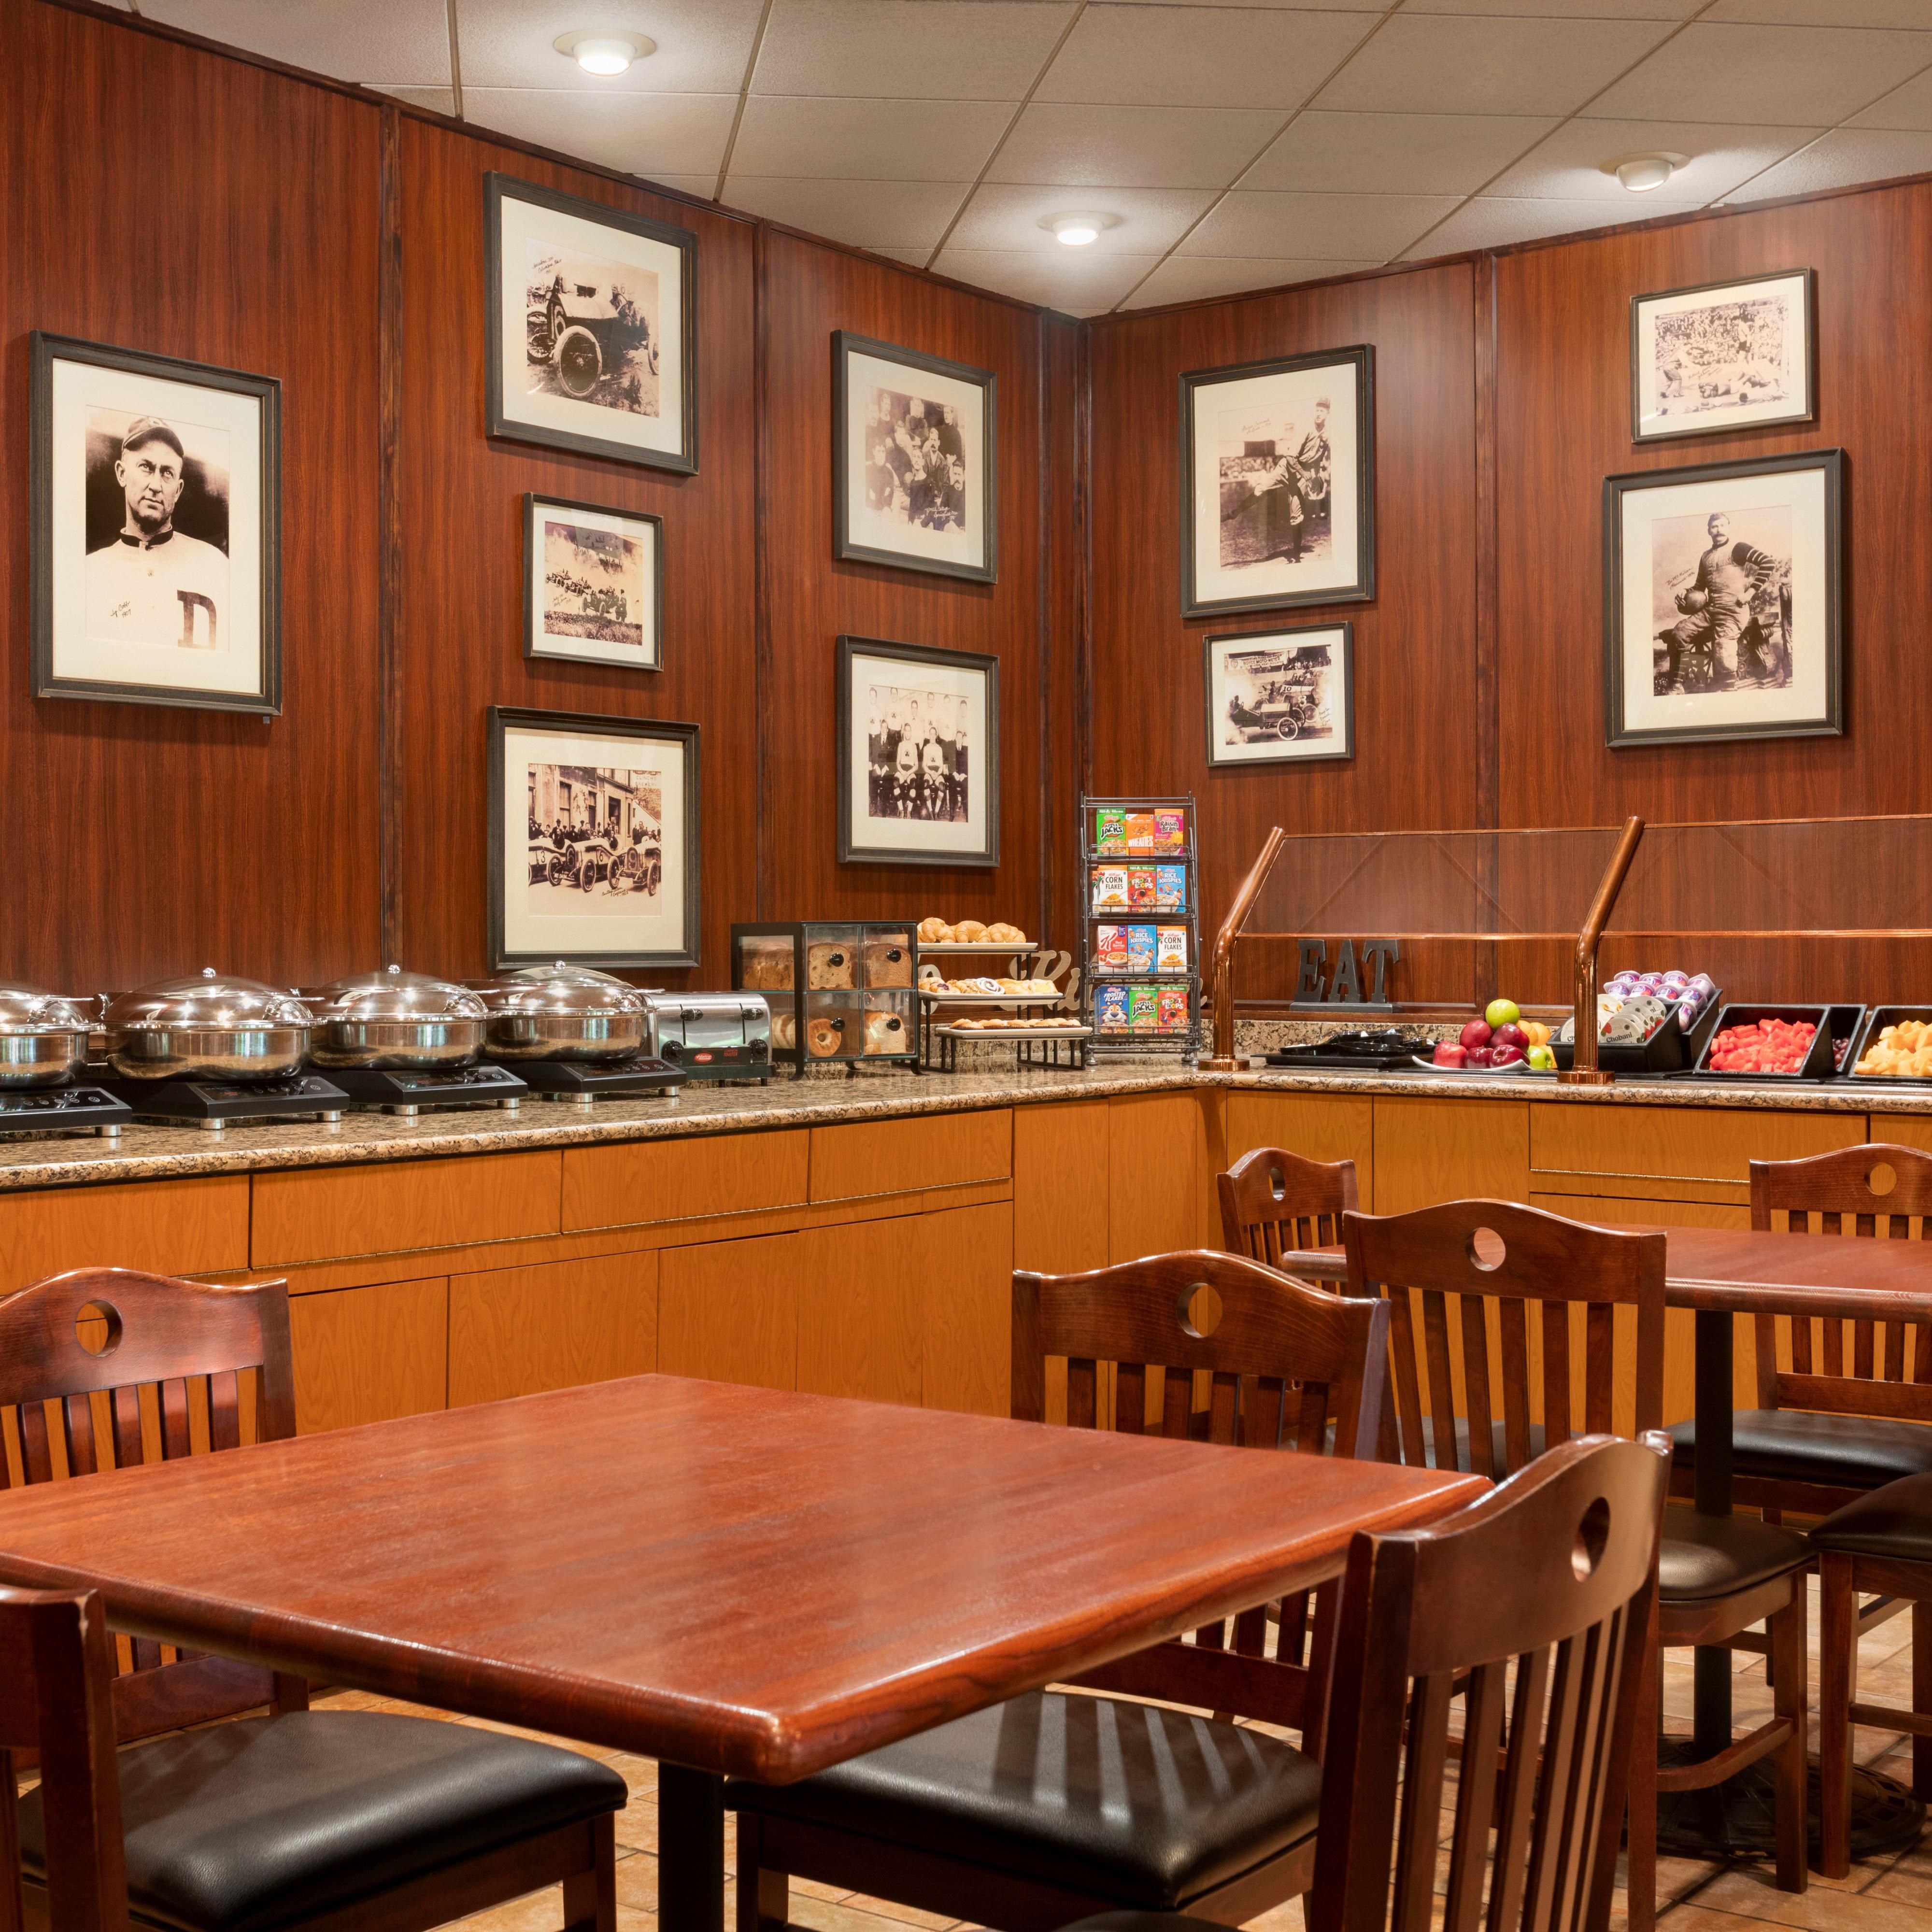 Choose between our buffet and à la carte favorites for breakfast.